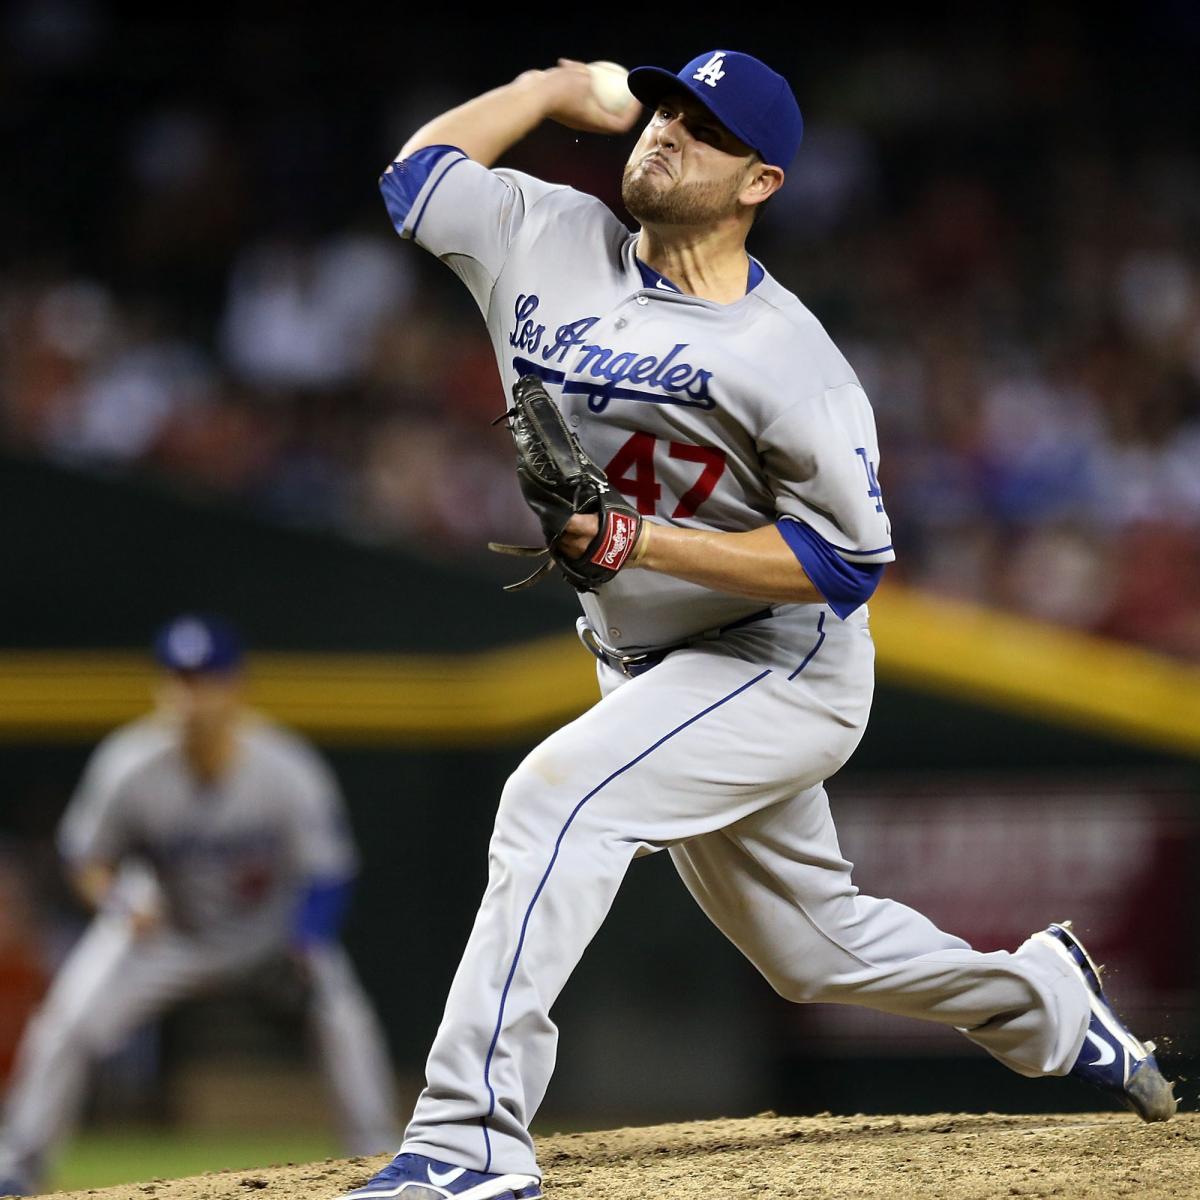 Ricky Nolasco's Sparkling Dodgers' Debut Shows He Can Impact Division ...